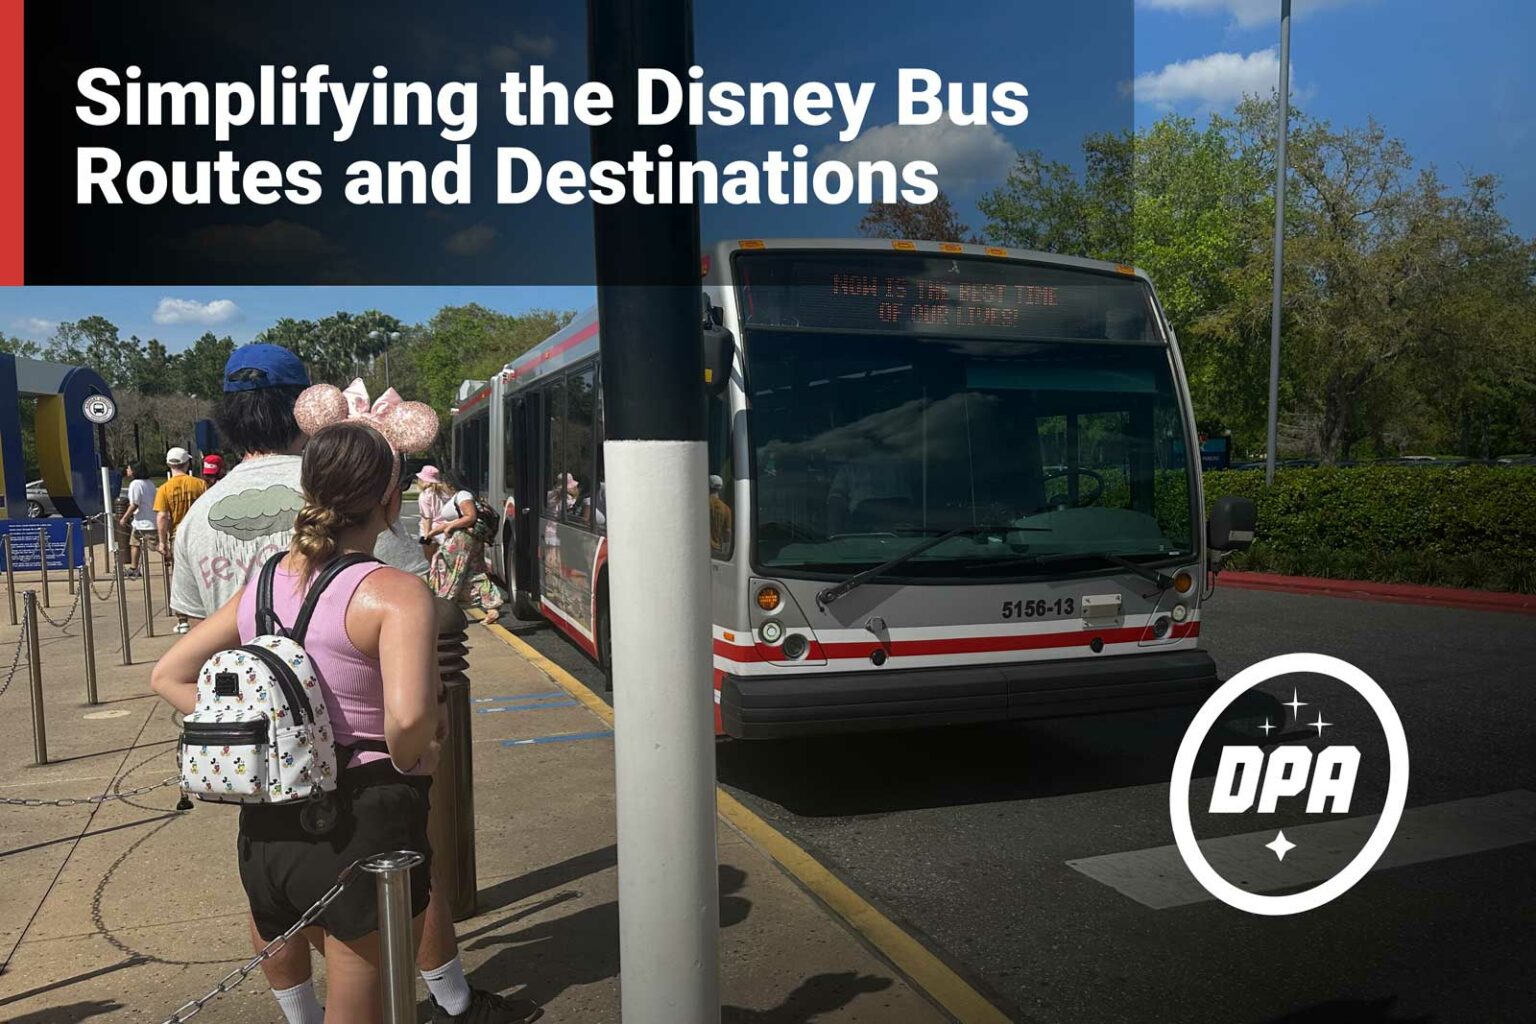 Simplifying the Disney Bus Routes and Destinations